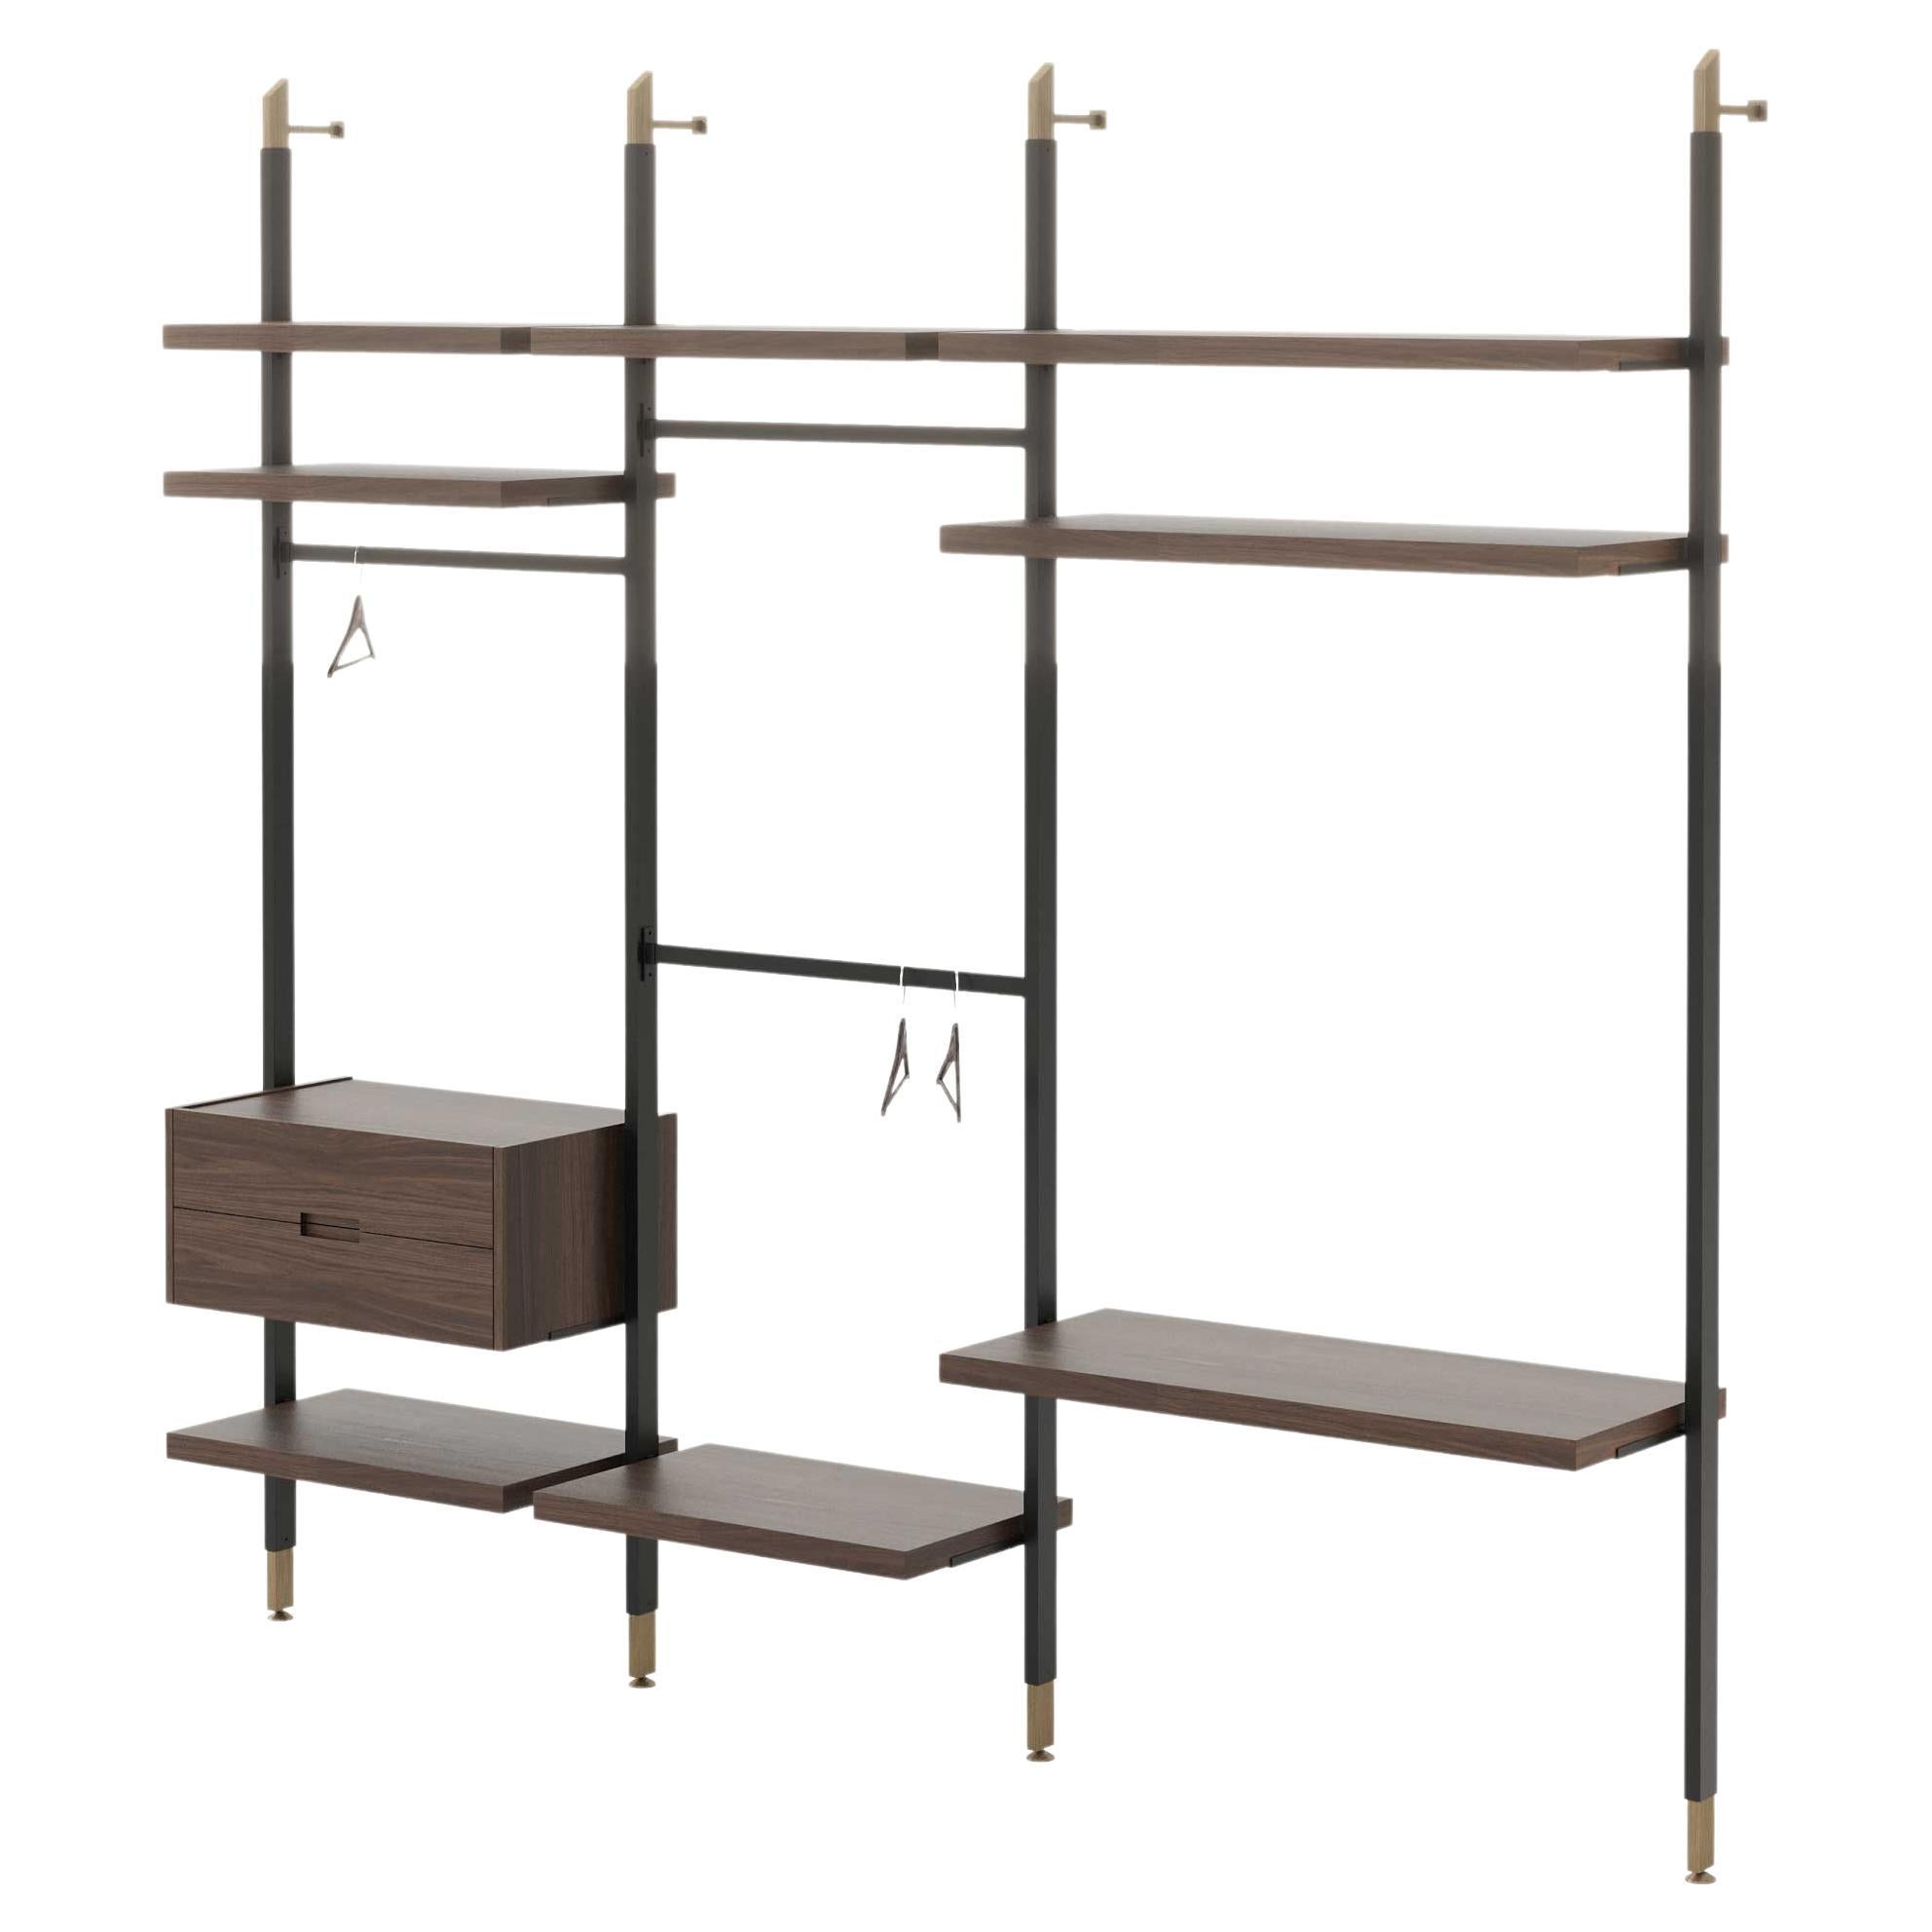 Art Deco Style His Modular Walk-In Closet Night System Made with Wood and Bronze